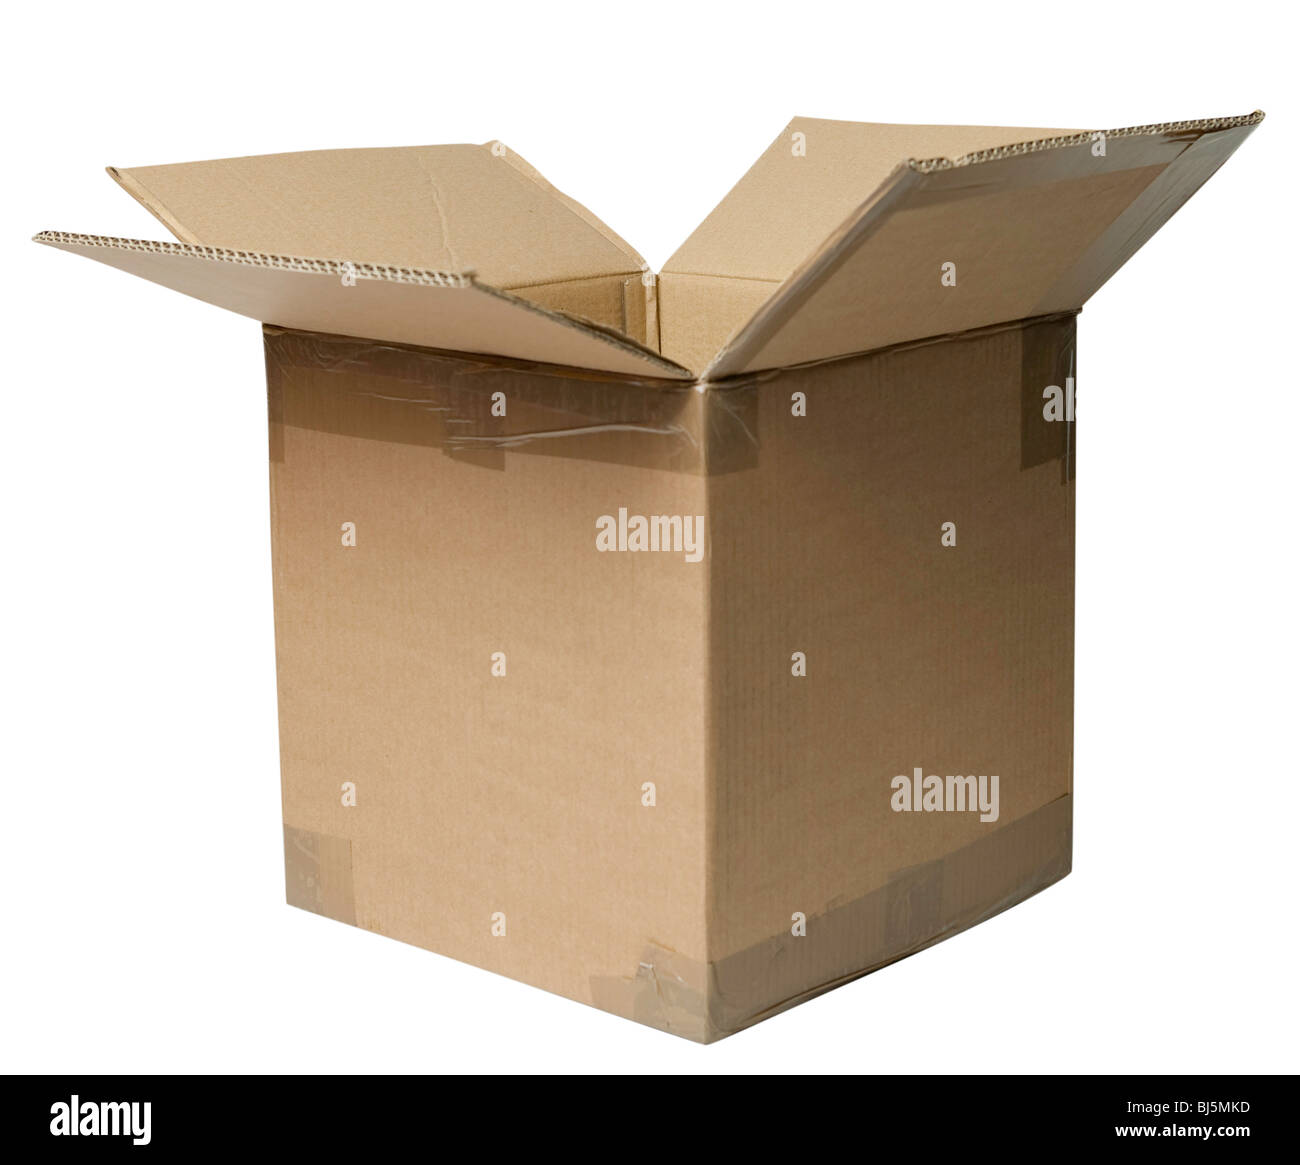 An open, square-shaped, empty cardboard box. Already cutout for easy placement. Stock Photo